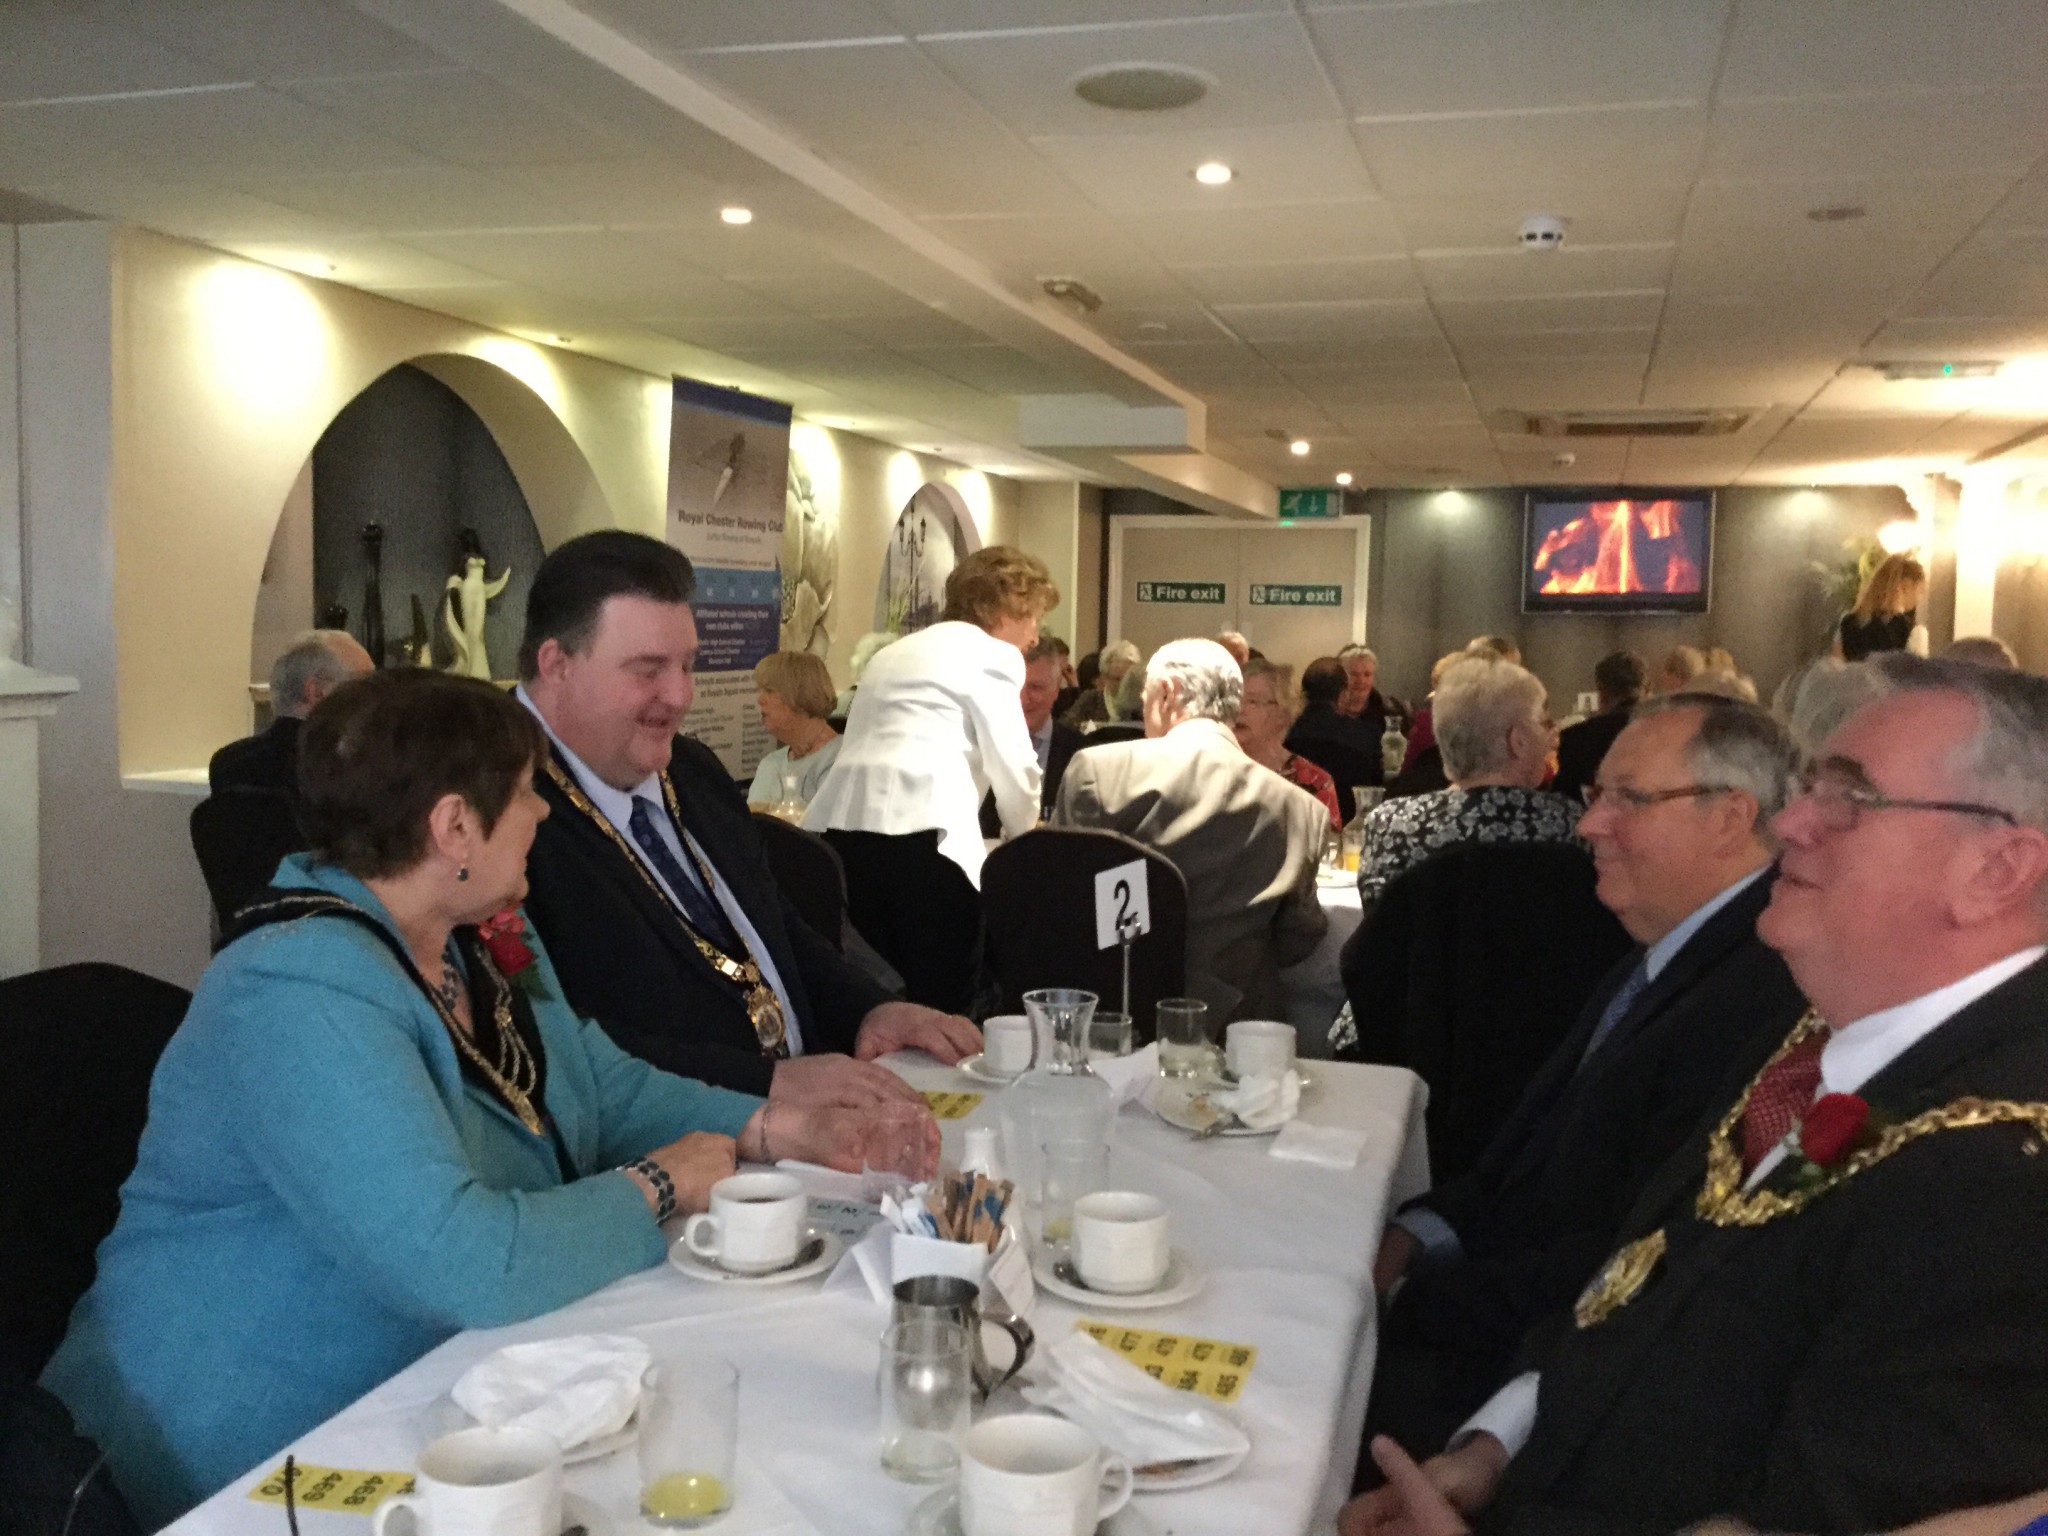 Photo of the Mayor of Frodsham's table companions at the Sheriff of Chester's Breakfast